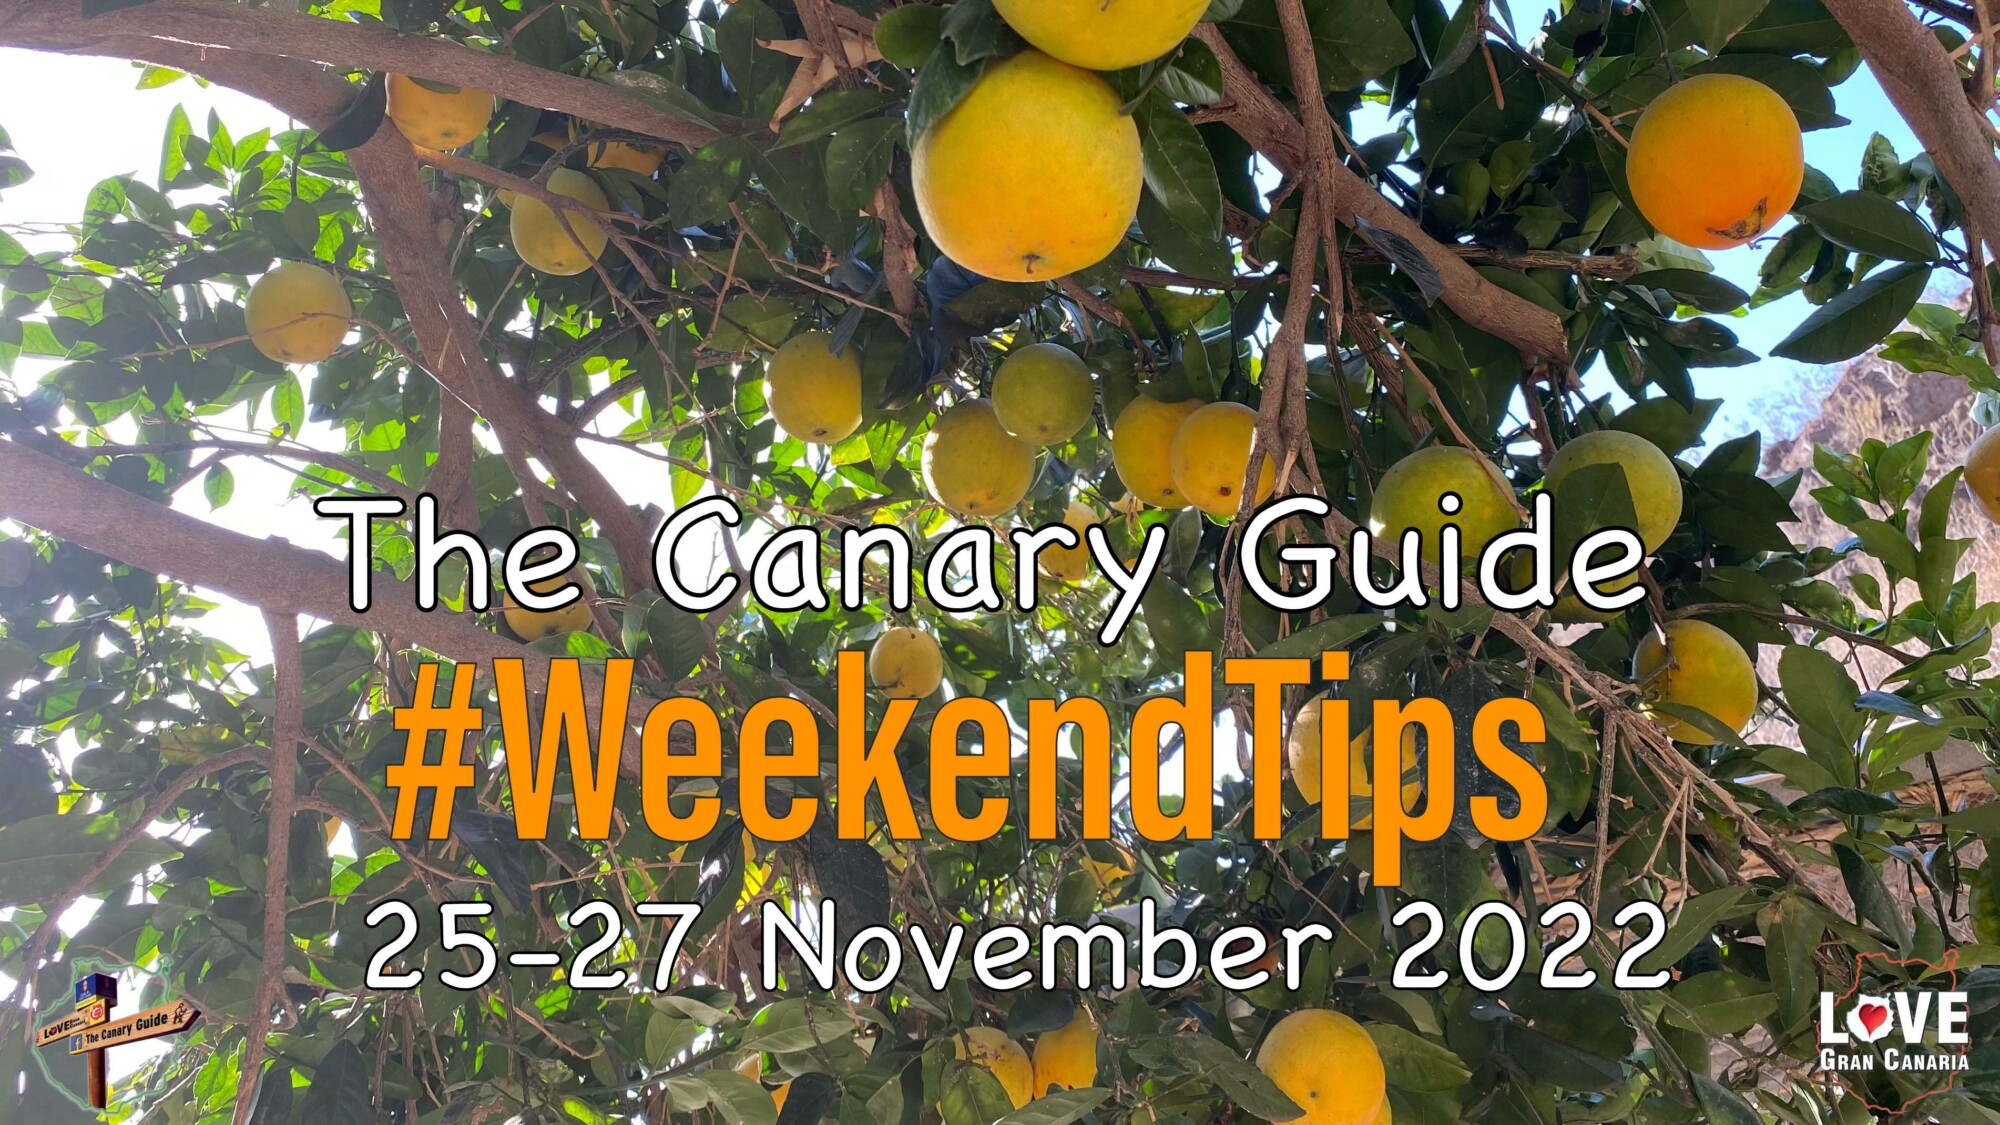 The Canary Guide #WeekendTips 25-27 November 2022